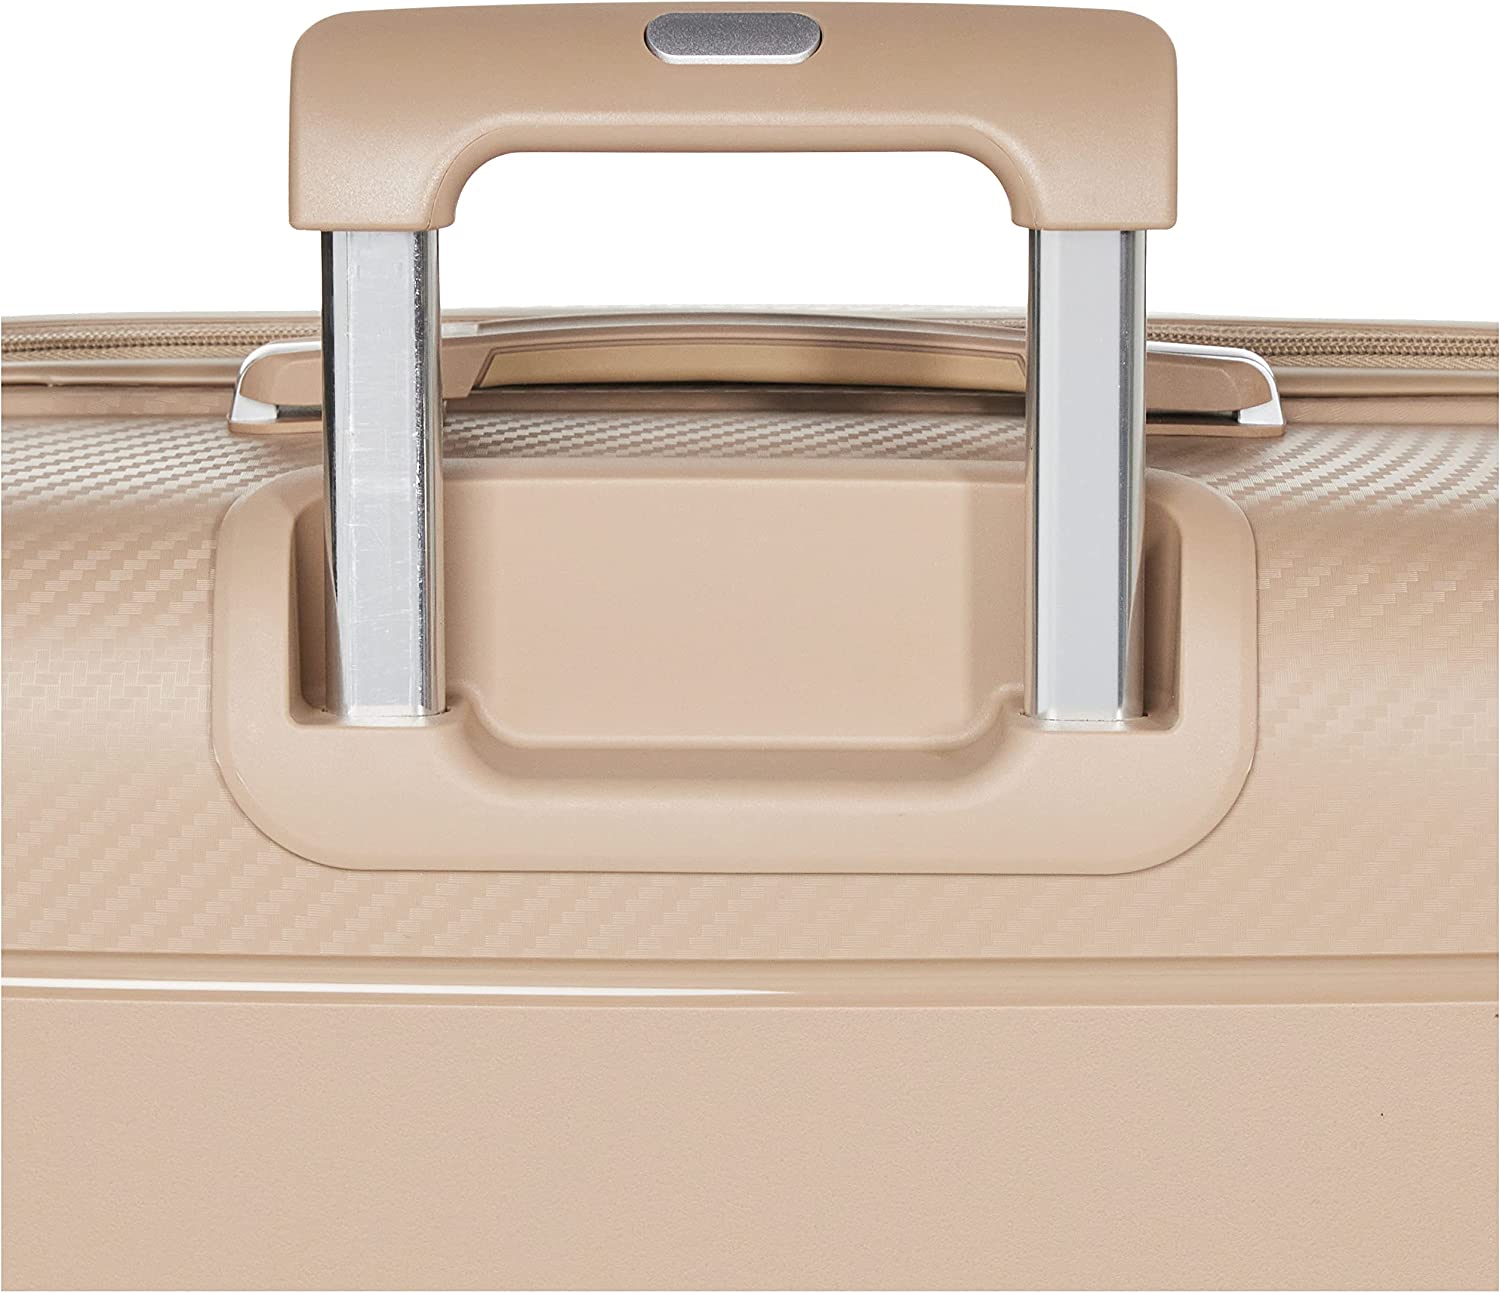 Pierre Cardin Lyon Collection Carry On - Champagne